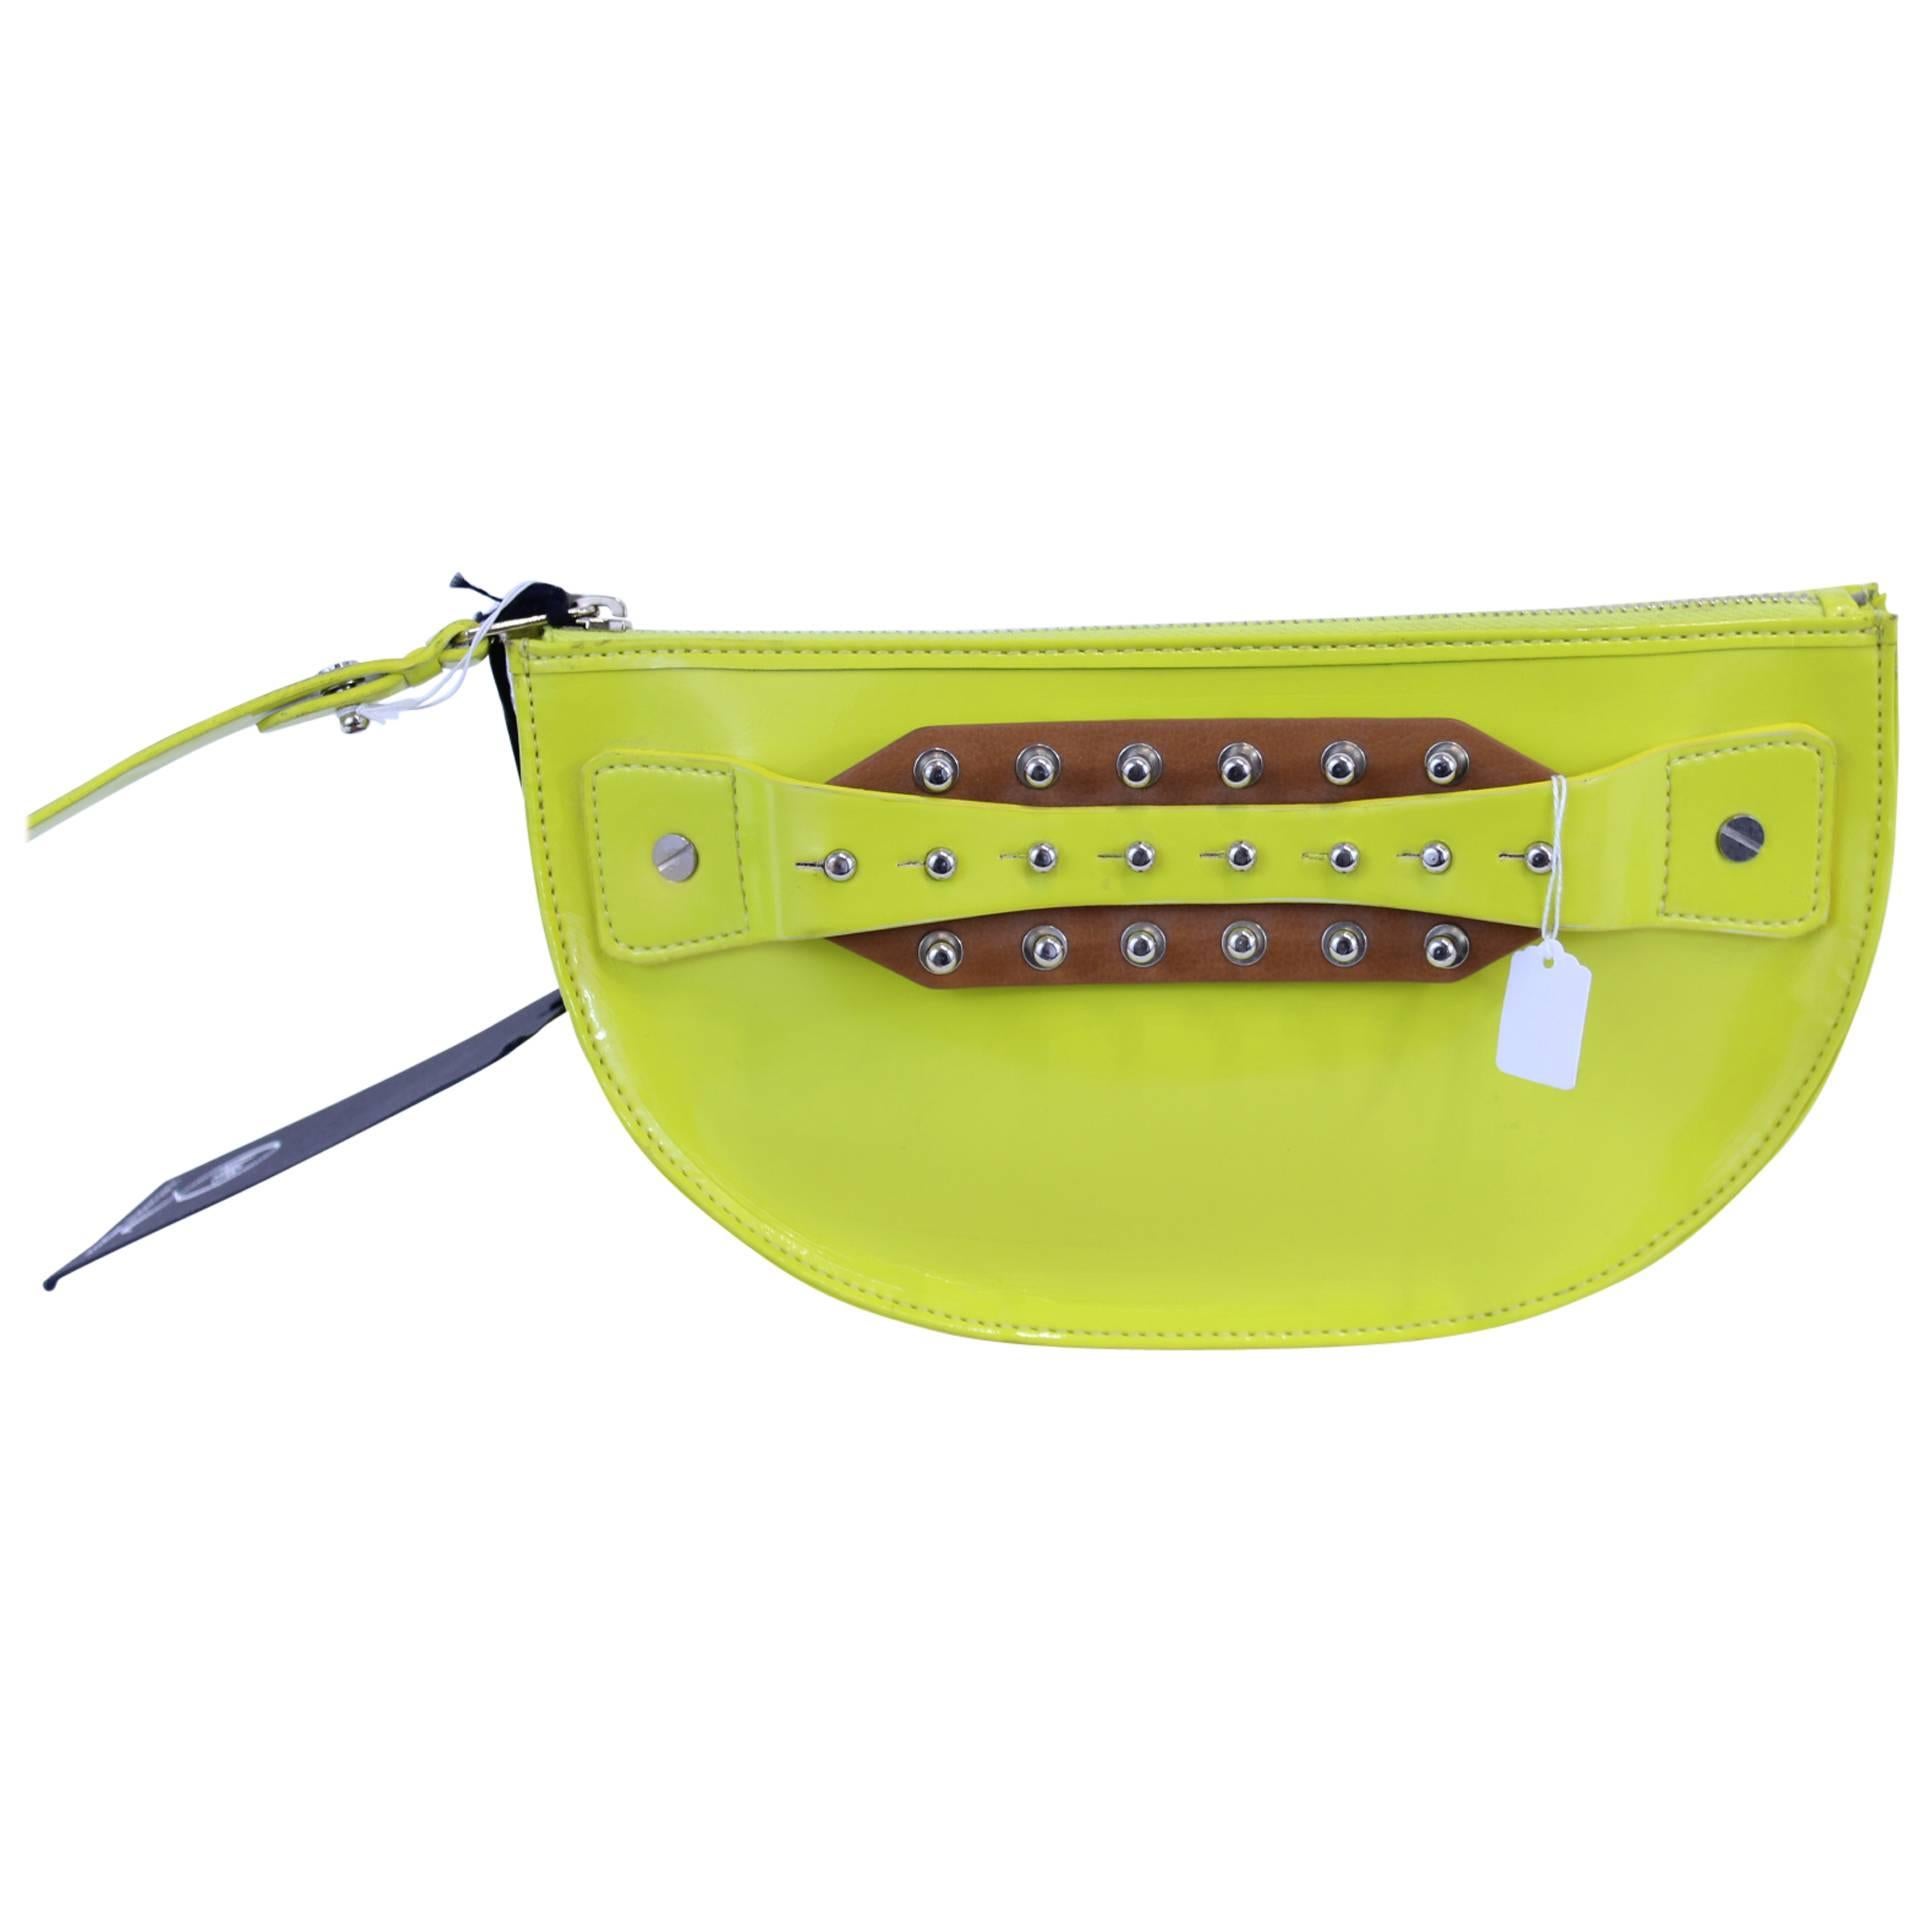 Alexander McQueen Lime Patented Leather Spike Clutch For Sale